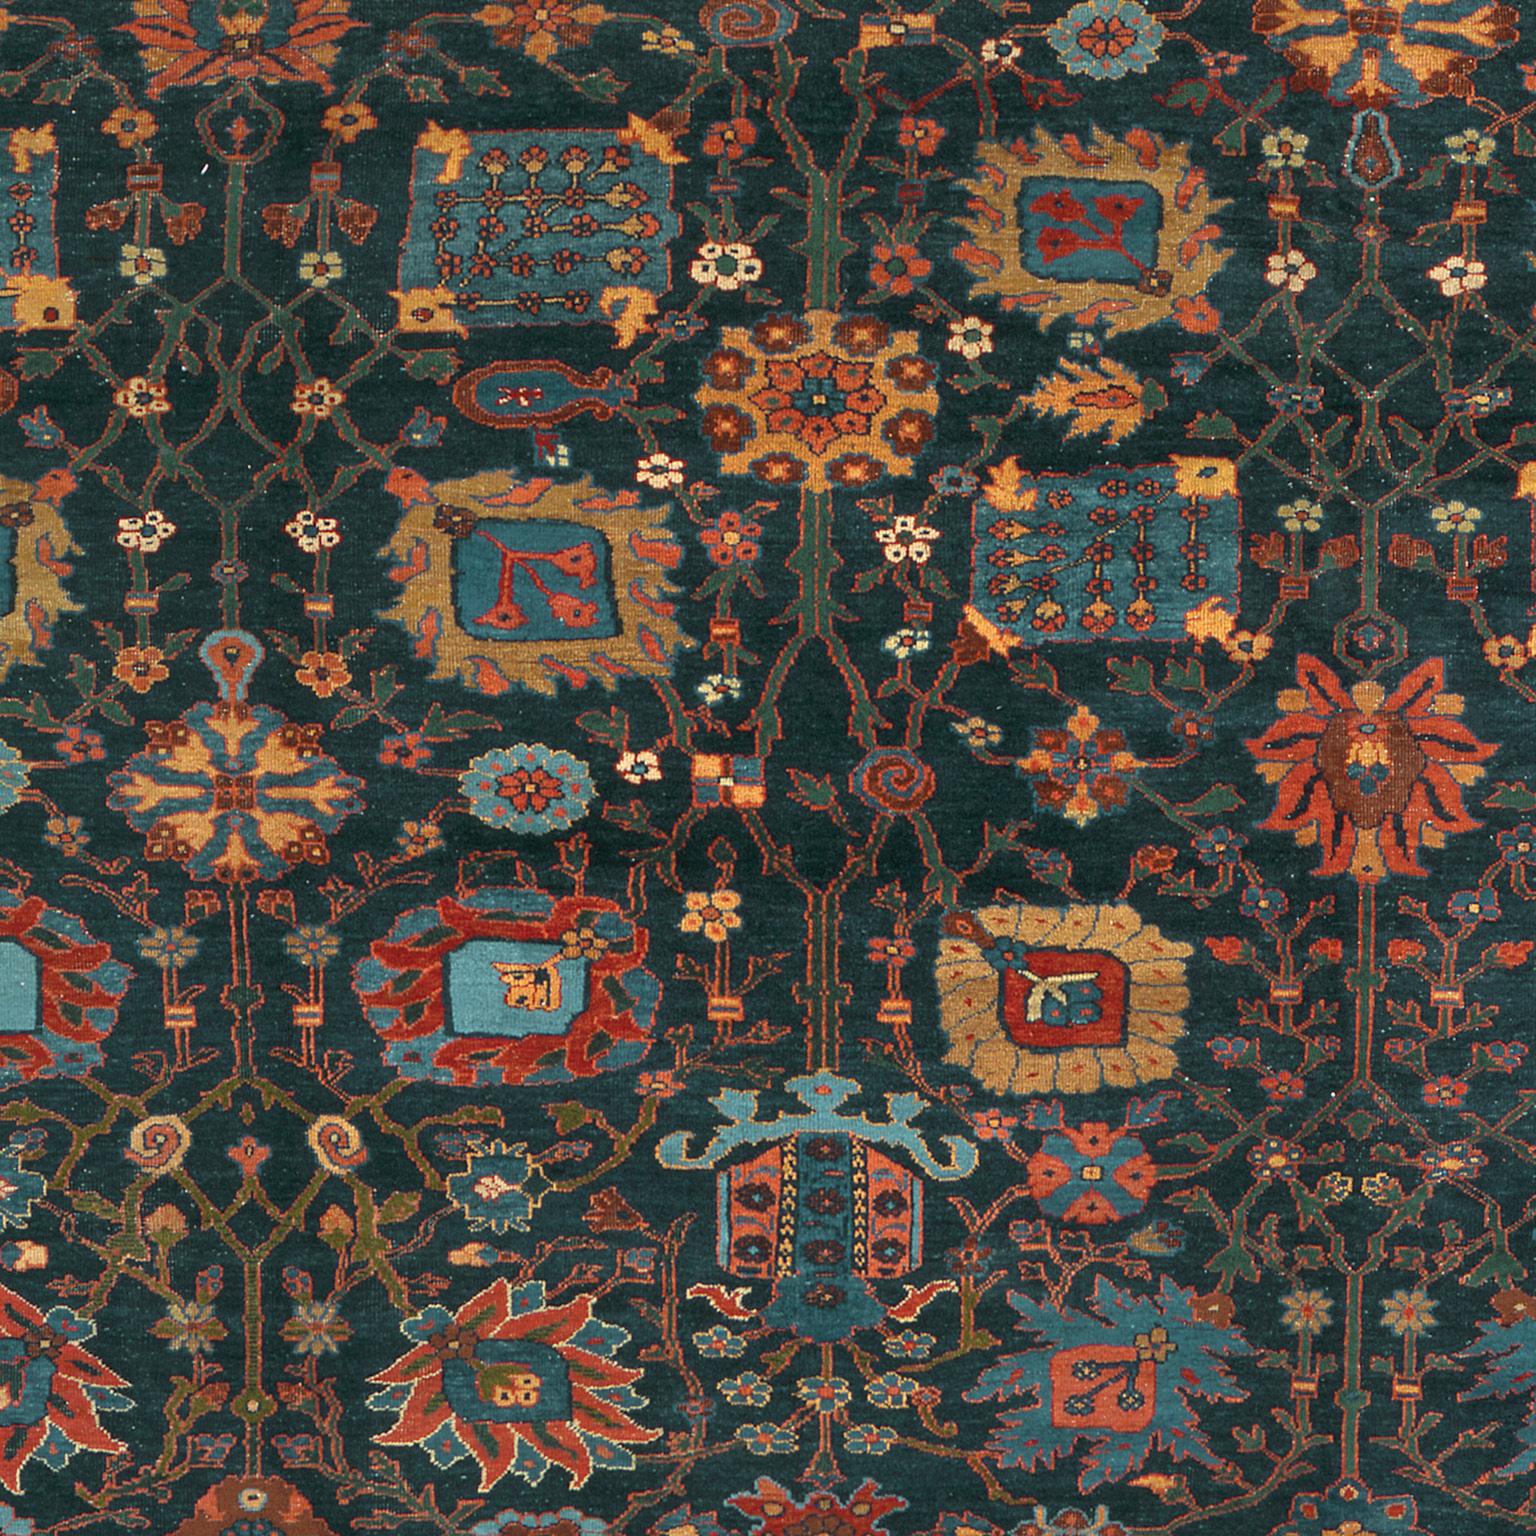 Hand-Woven Late 19th Century Persian Sultanabad Rug